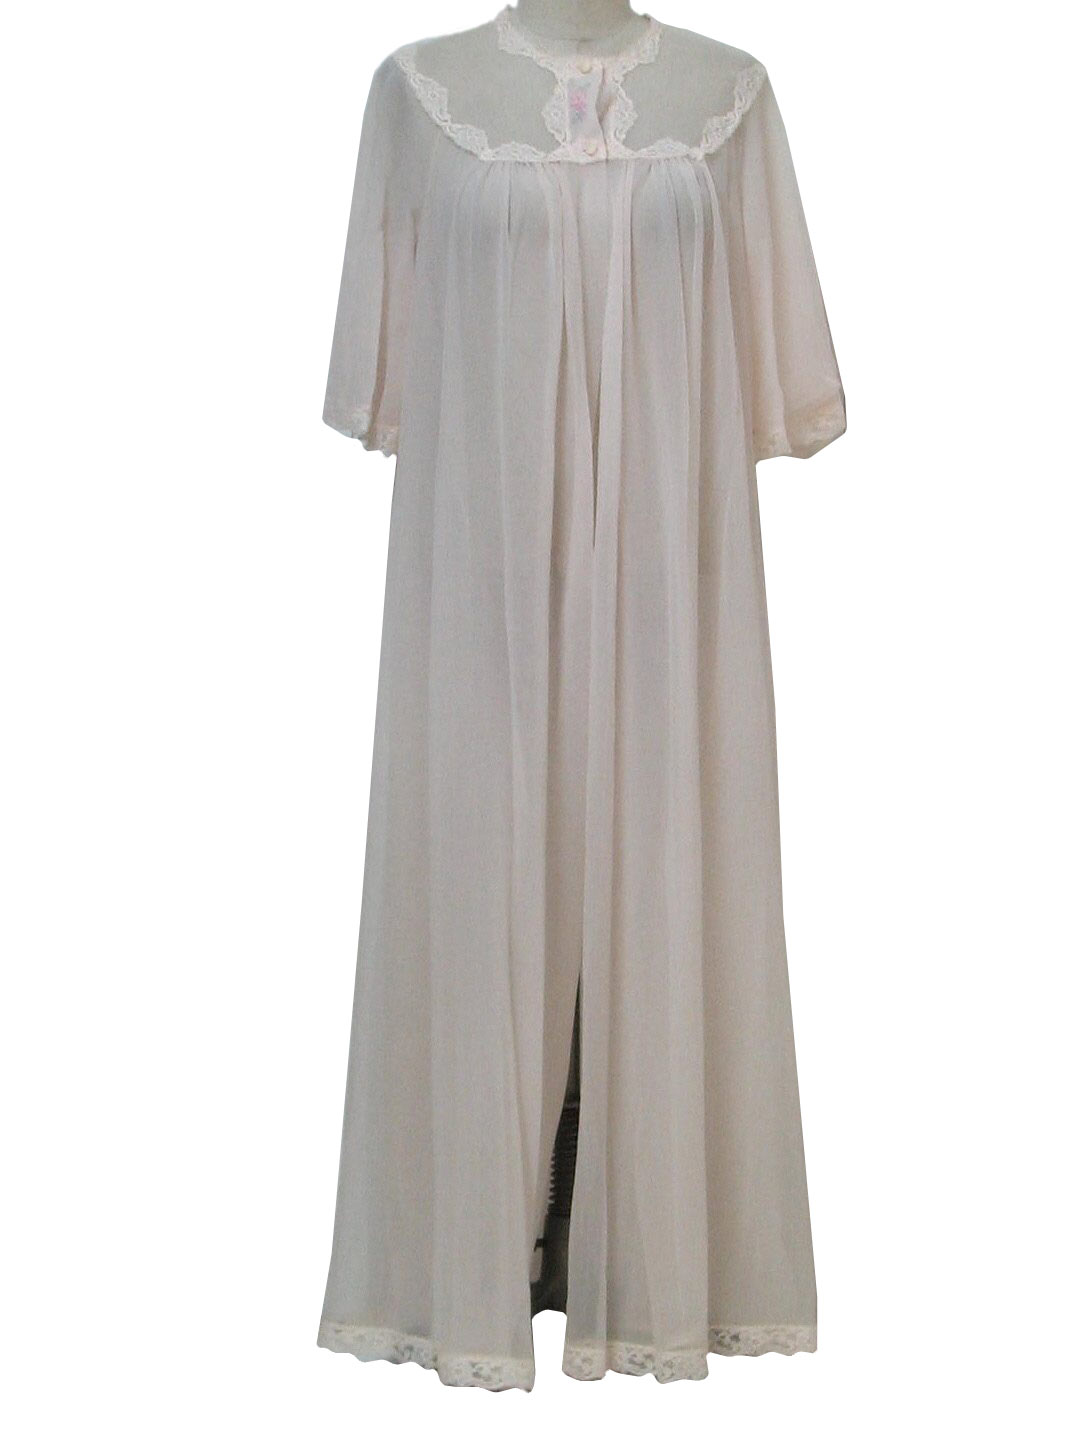 70s Womens Lingerie Nightgown (Missing Label): 70s -Missing Label ...